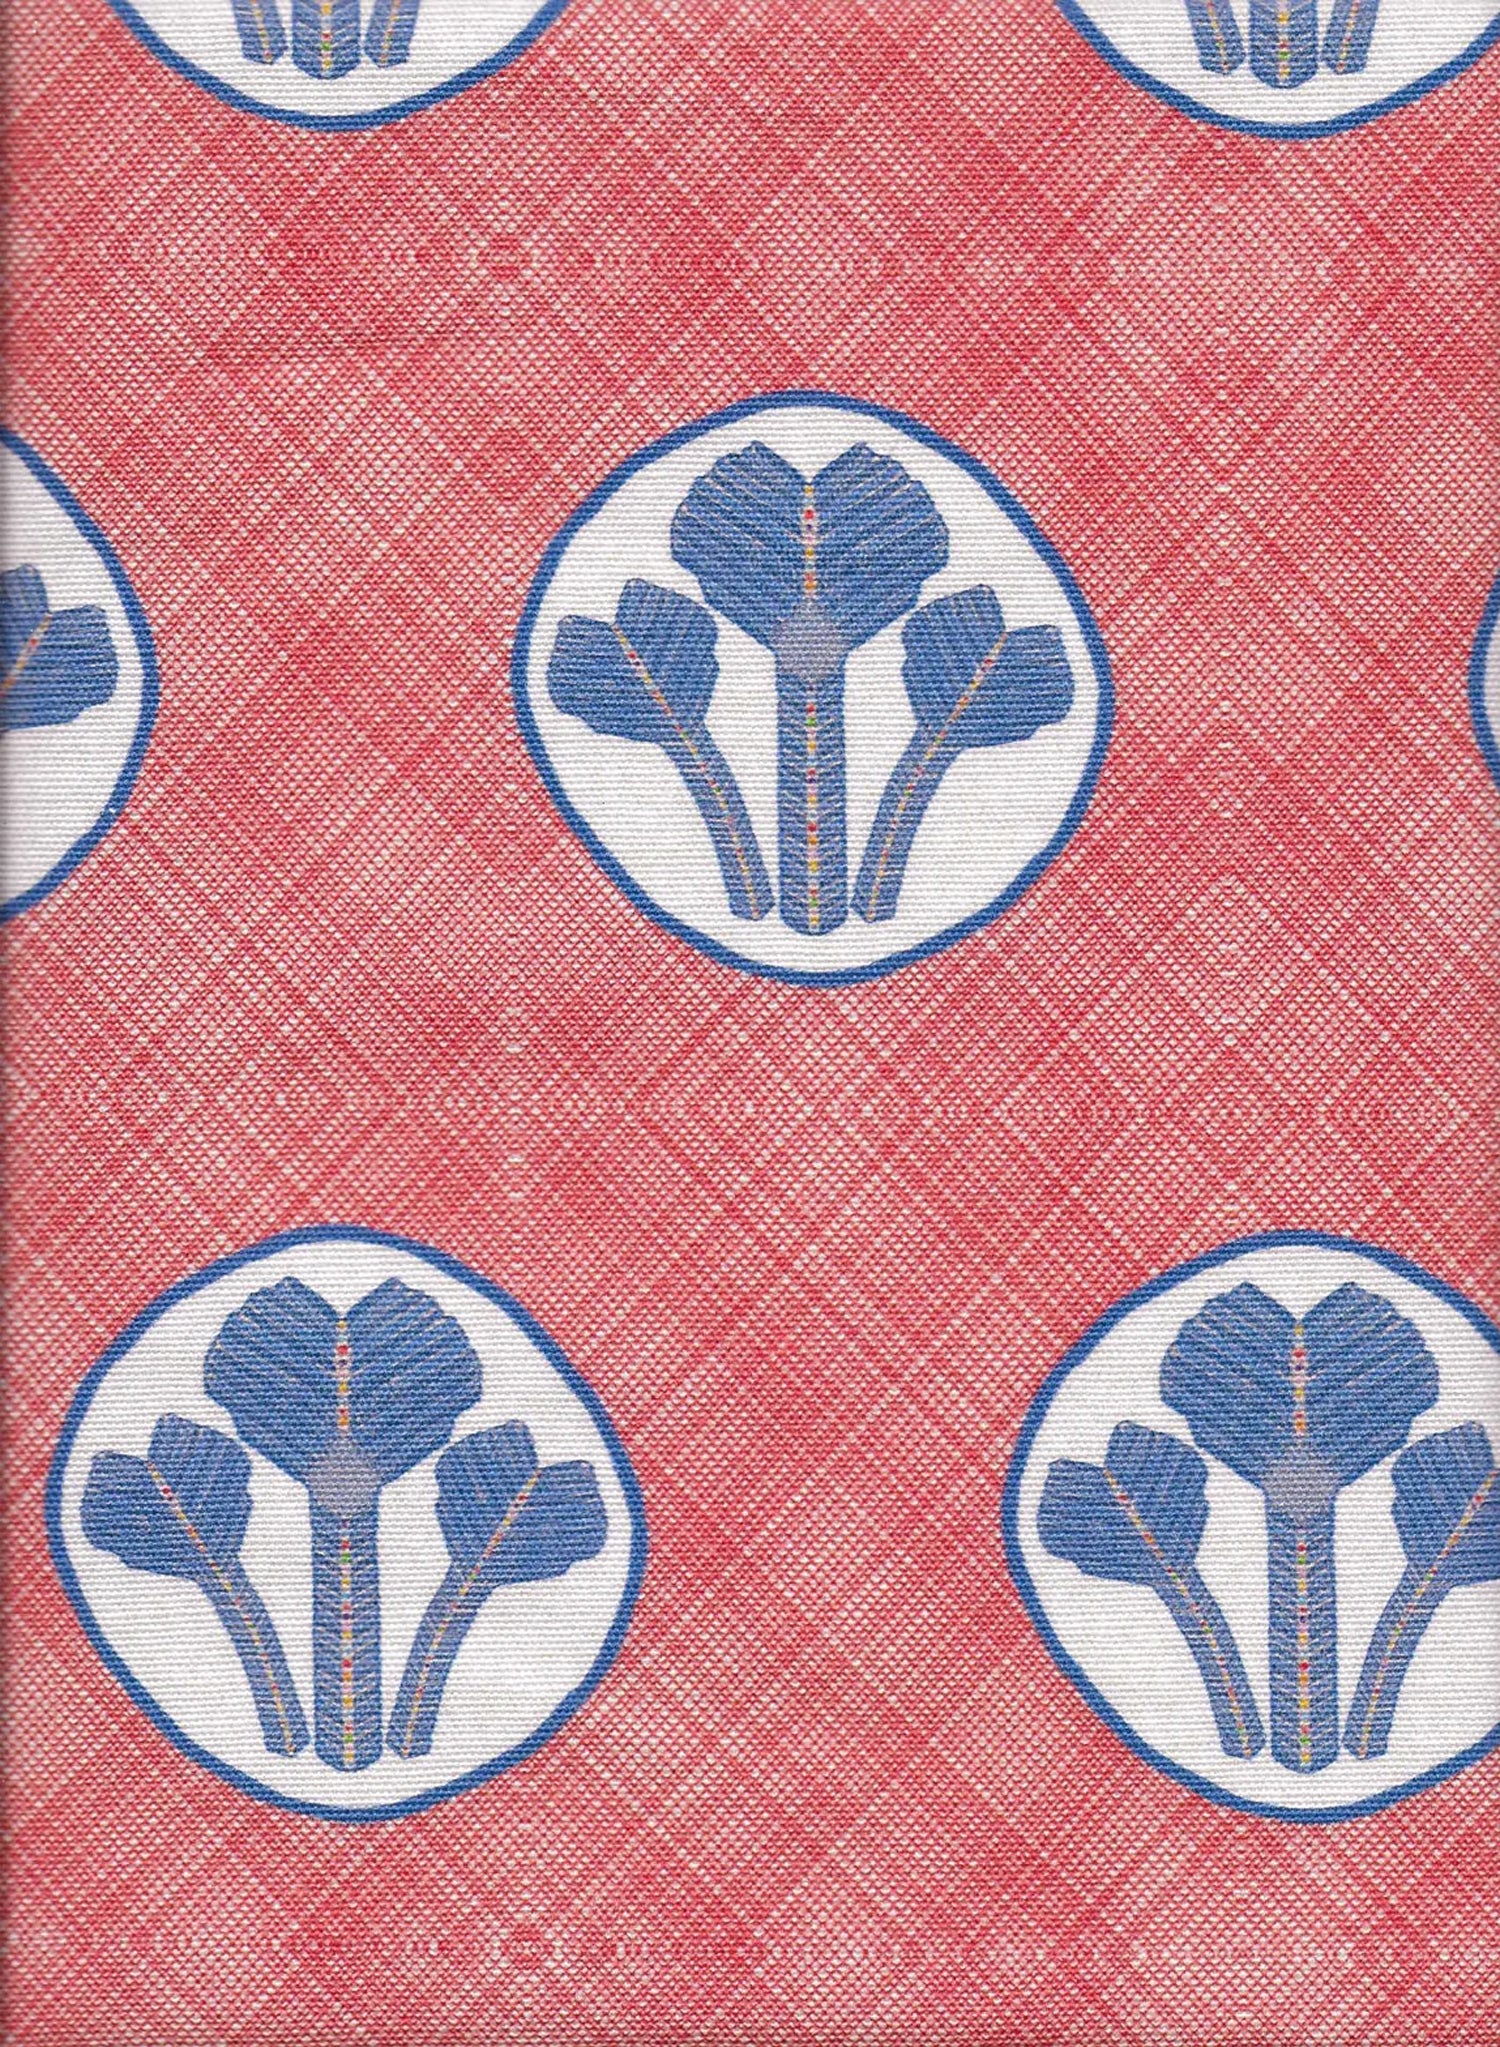 Detail of fabric in a repeating curvilinear floral print in blue and cream on a red field.